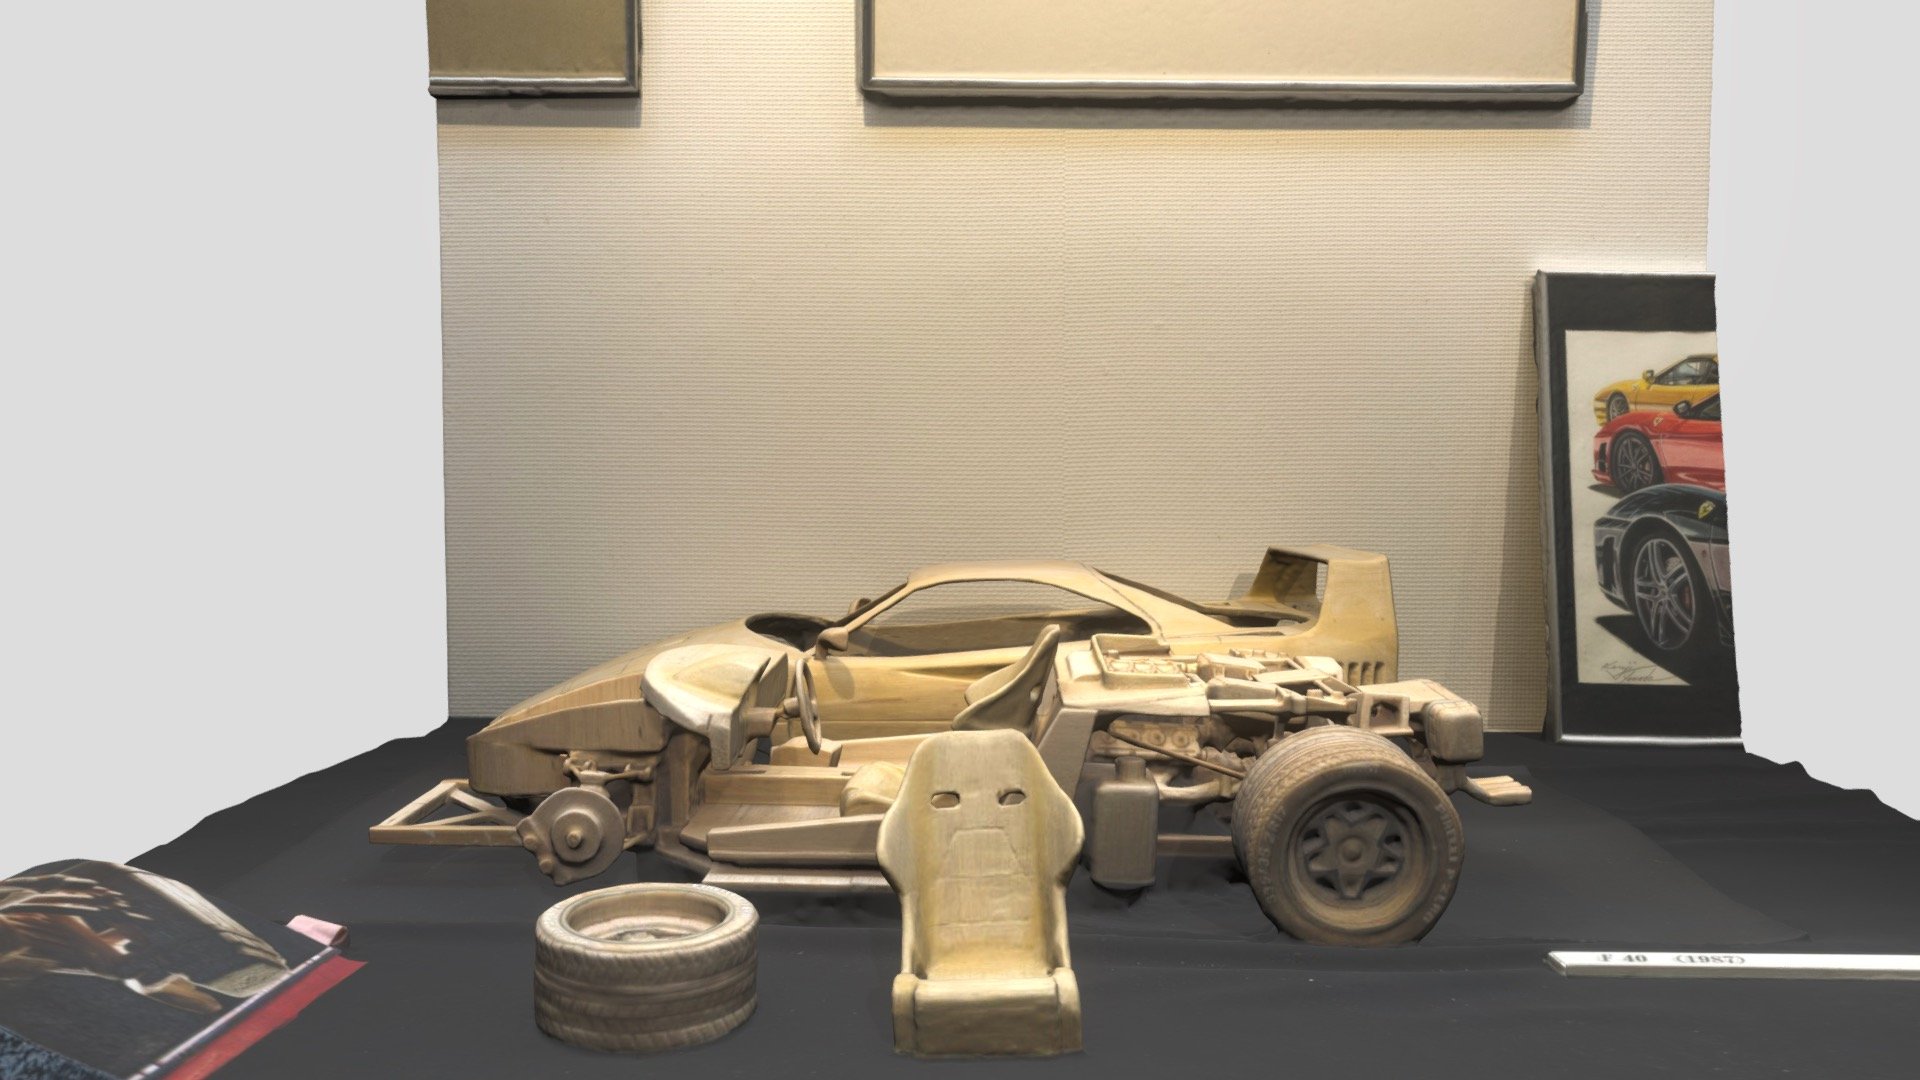 https://blog.goo.ne.jp/kenjiyumiko

Yamada Kenji
He carves wood and builds elaborate one-sixth scale models of Ferraris from the component level.
All parts are handmade, and after this, they are painted and assembled. The finished model is amazing!
The Ferrari painting on the wall is also his handiwork 3d model